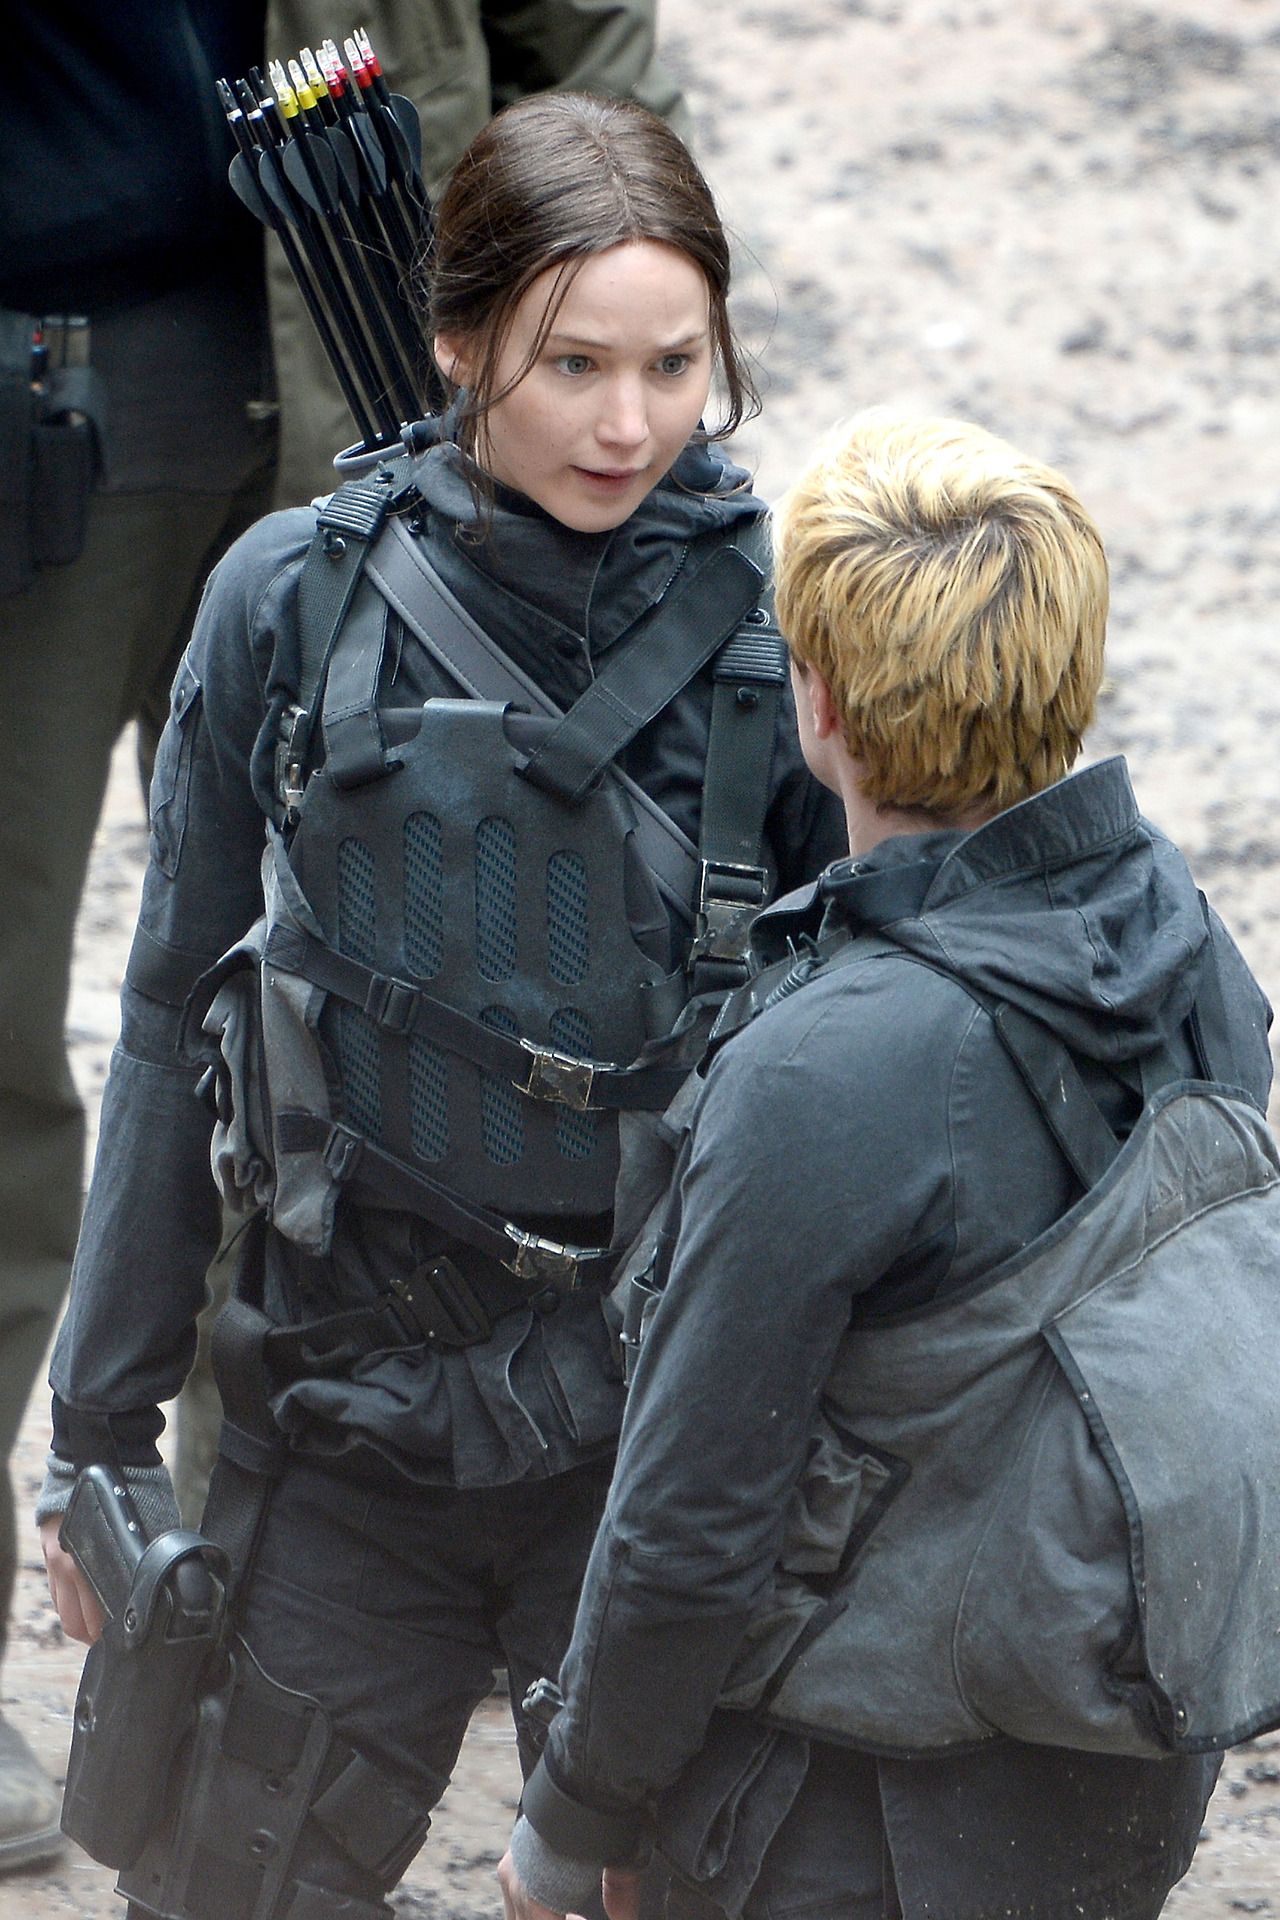 Download 1536x2048 The Hunger Games Mockingjay Part 2 